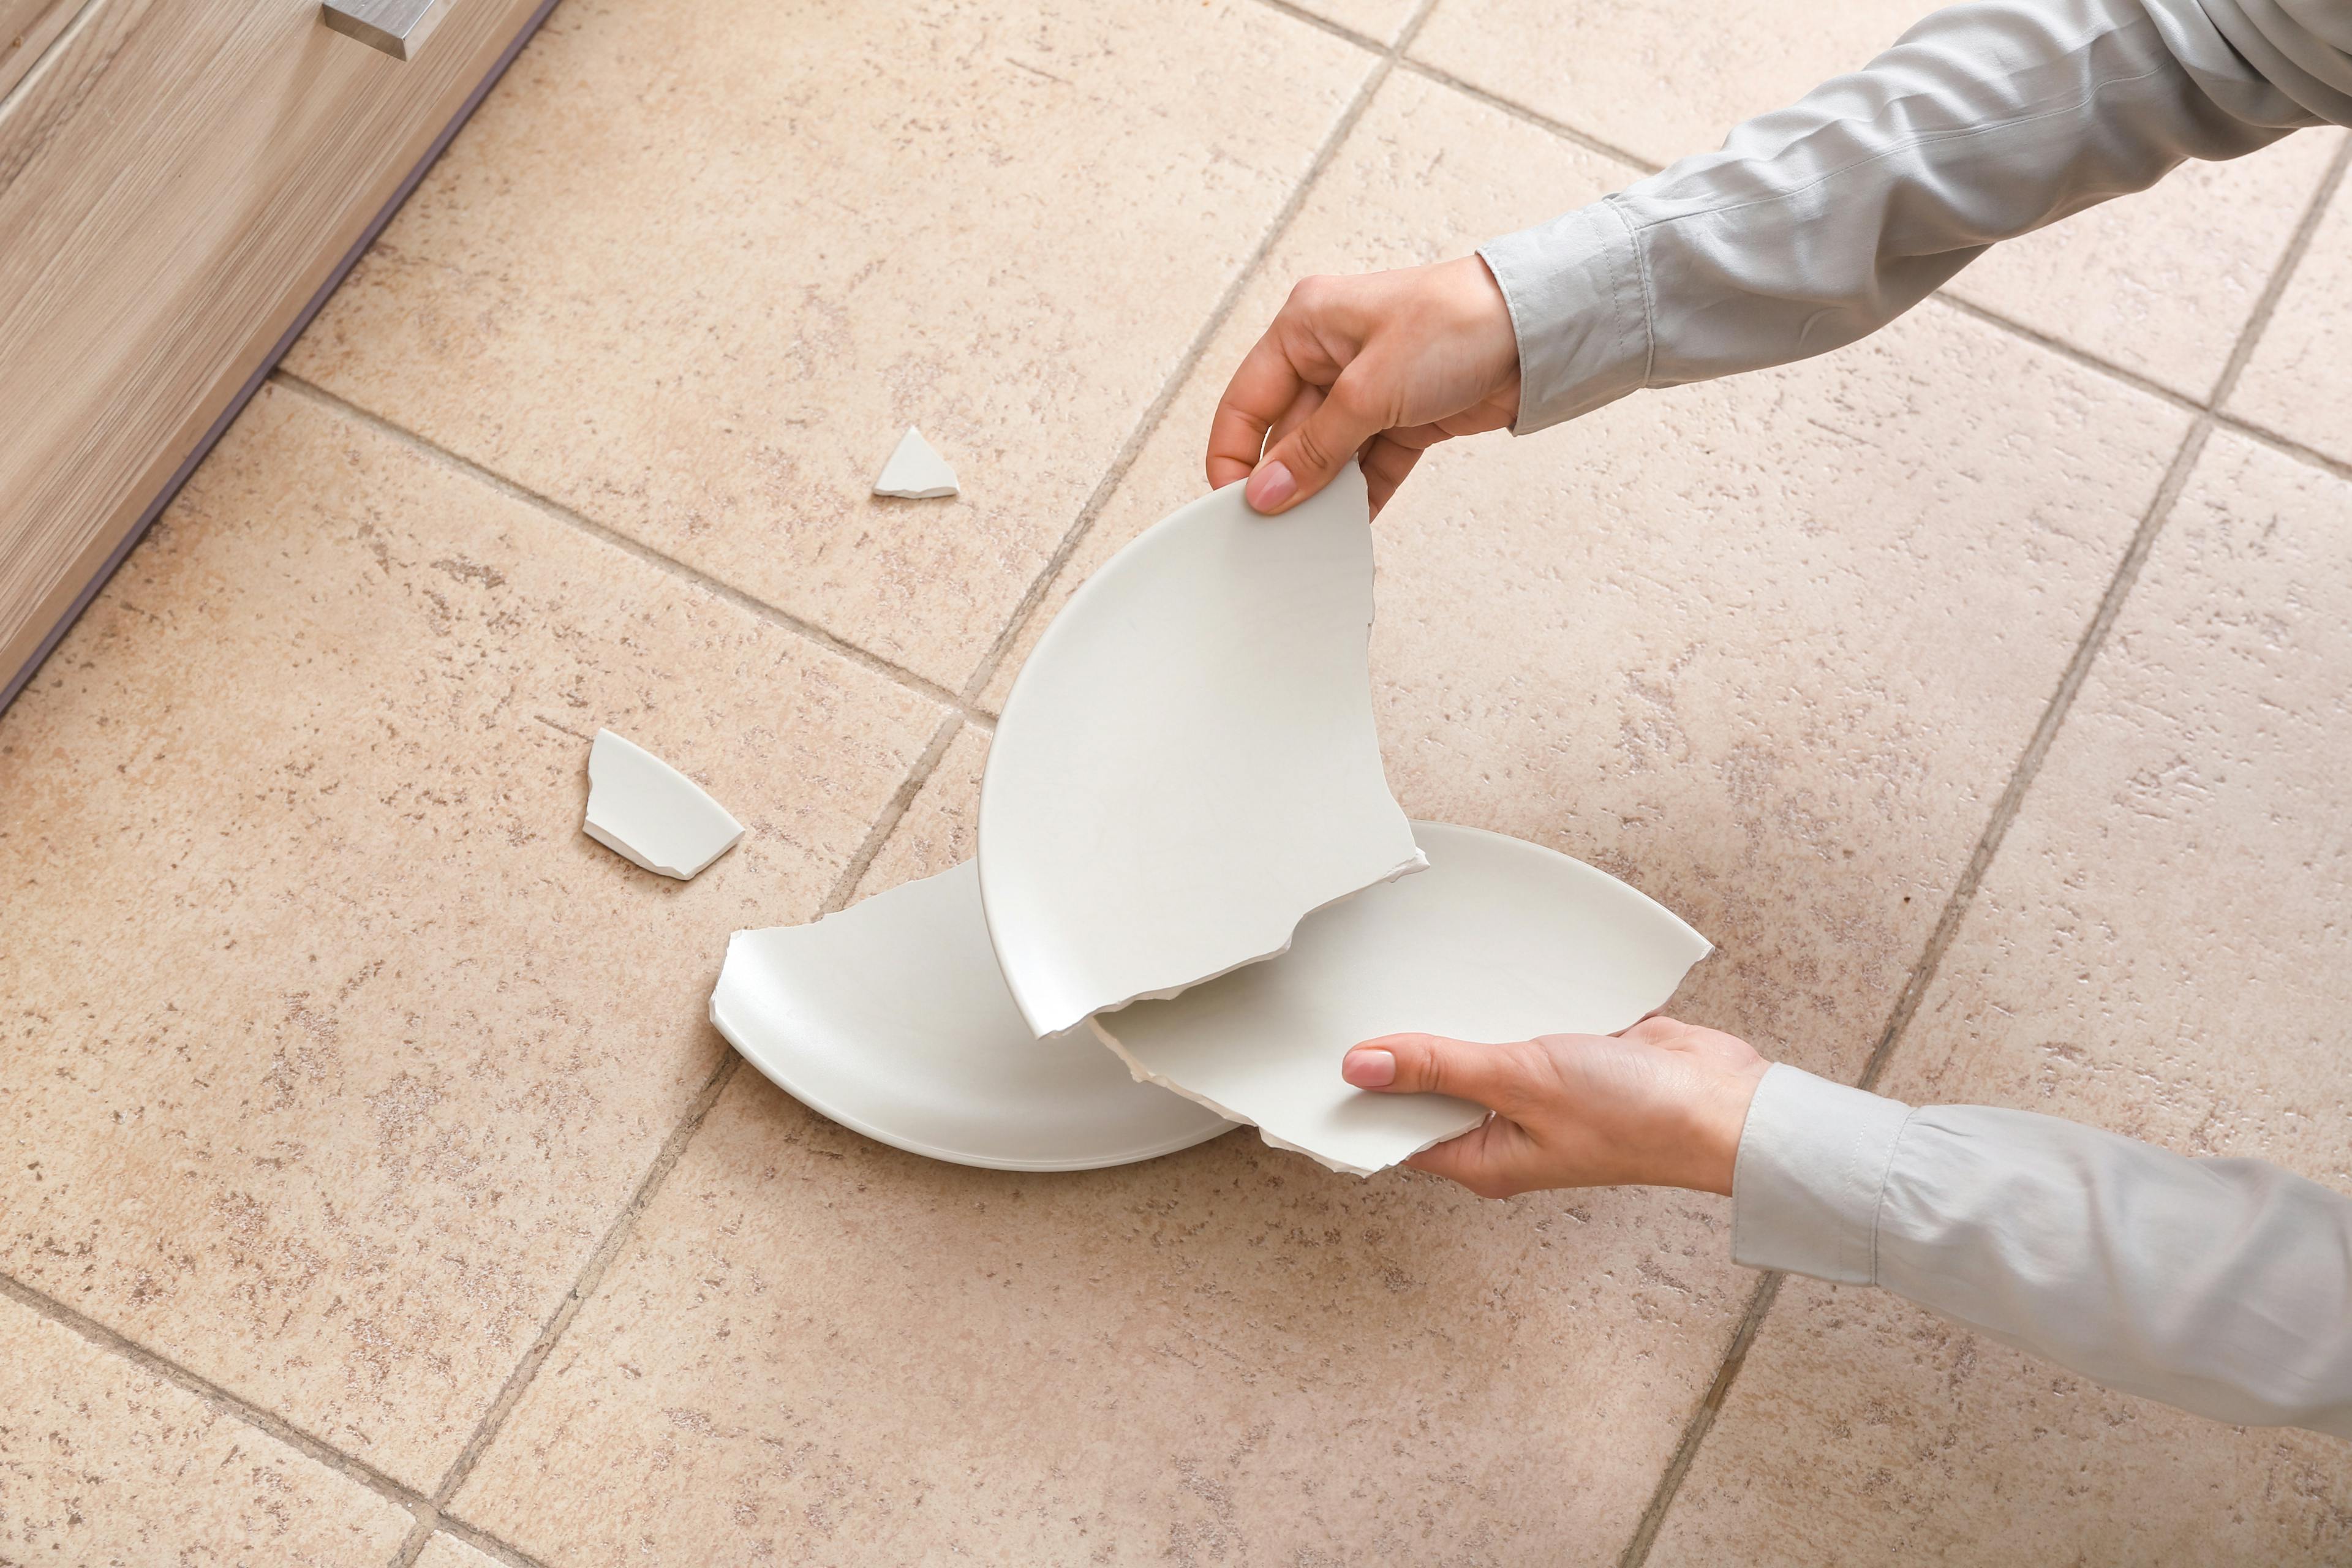 Stock image of a broken plate